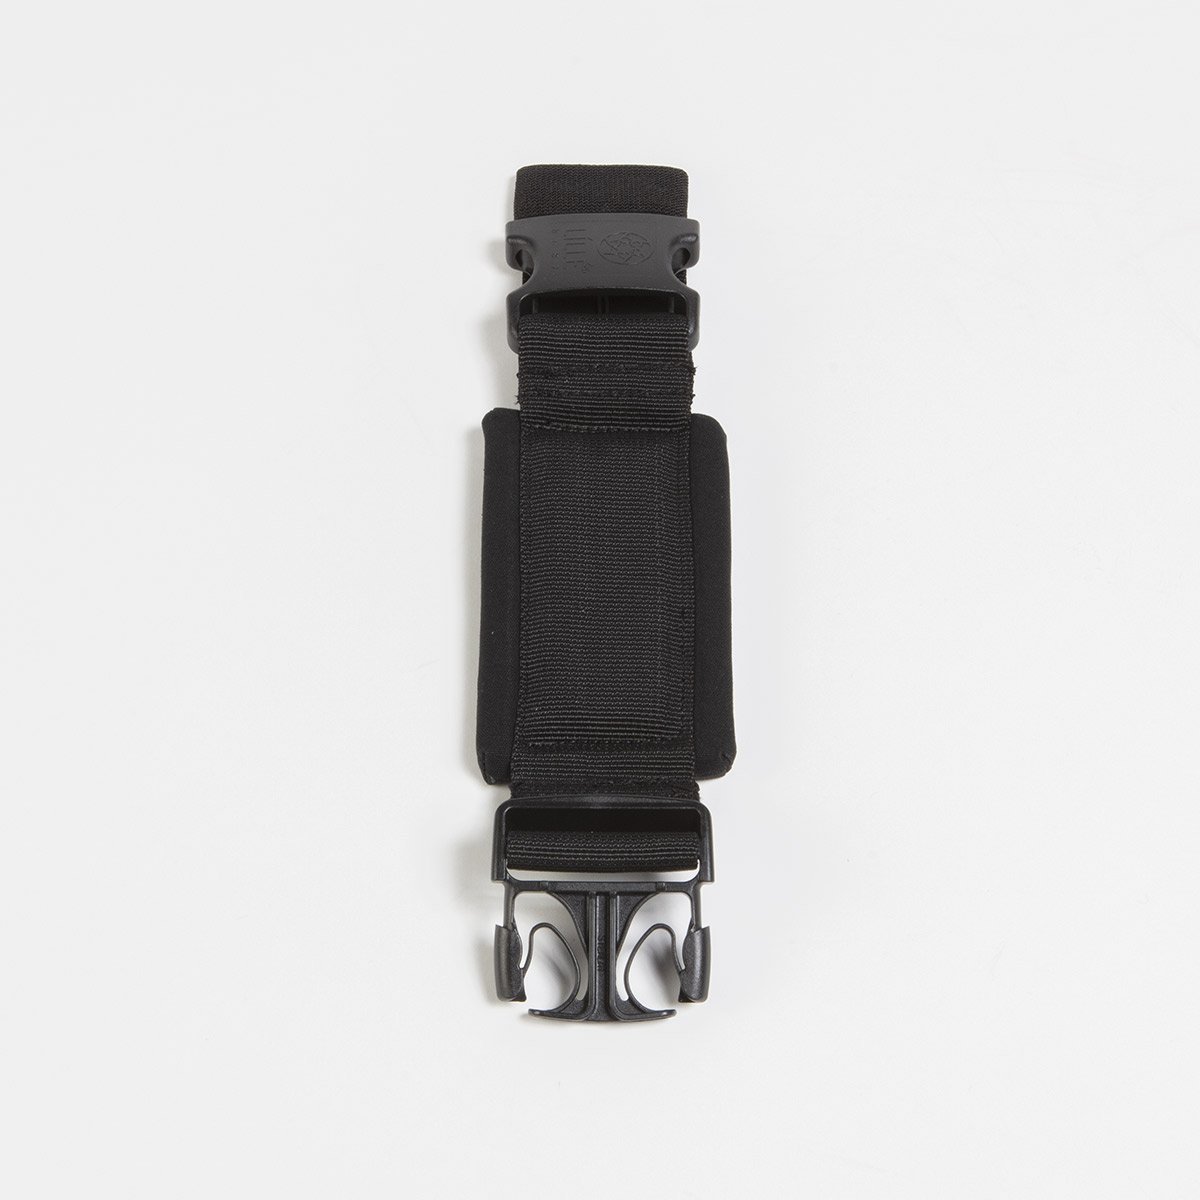 Lillebaby extension strap in black